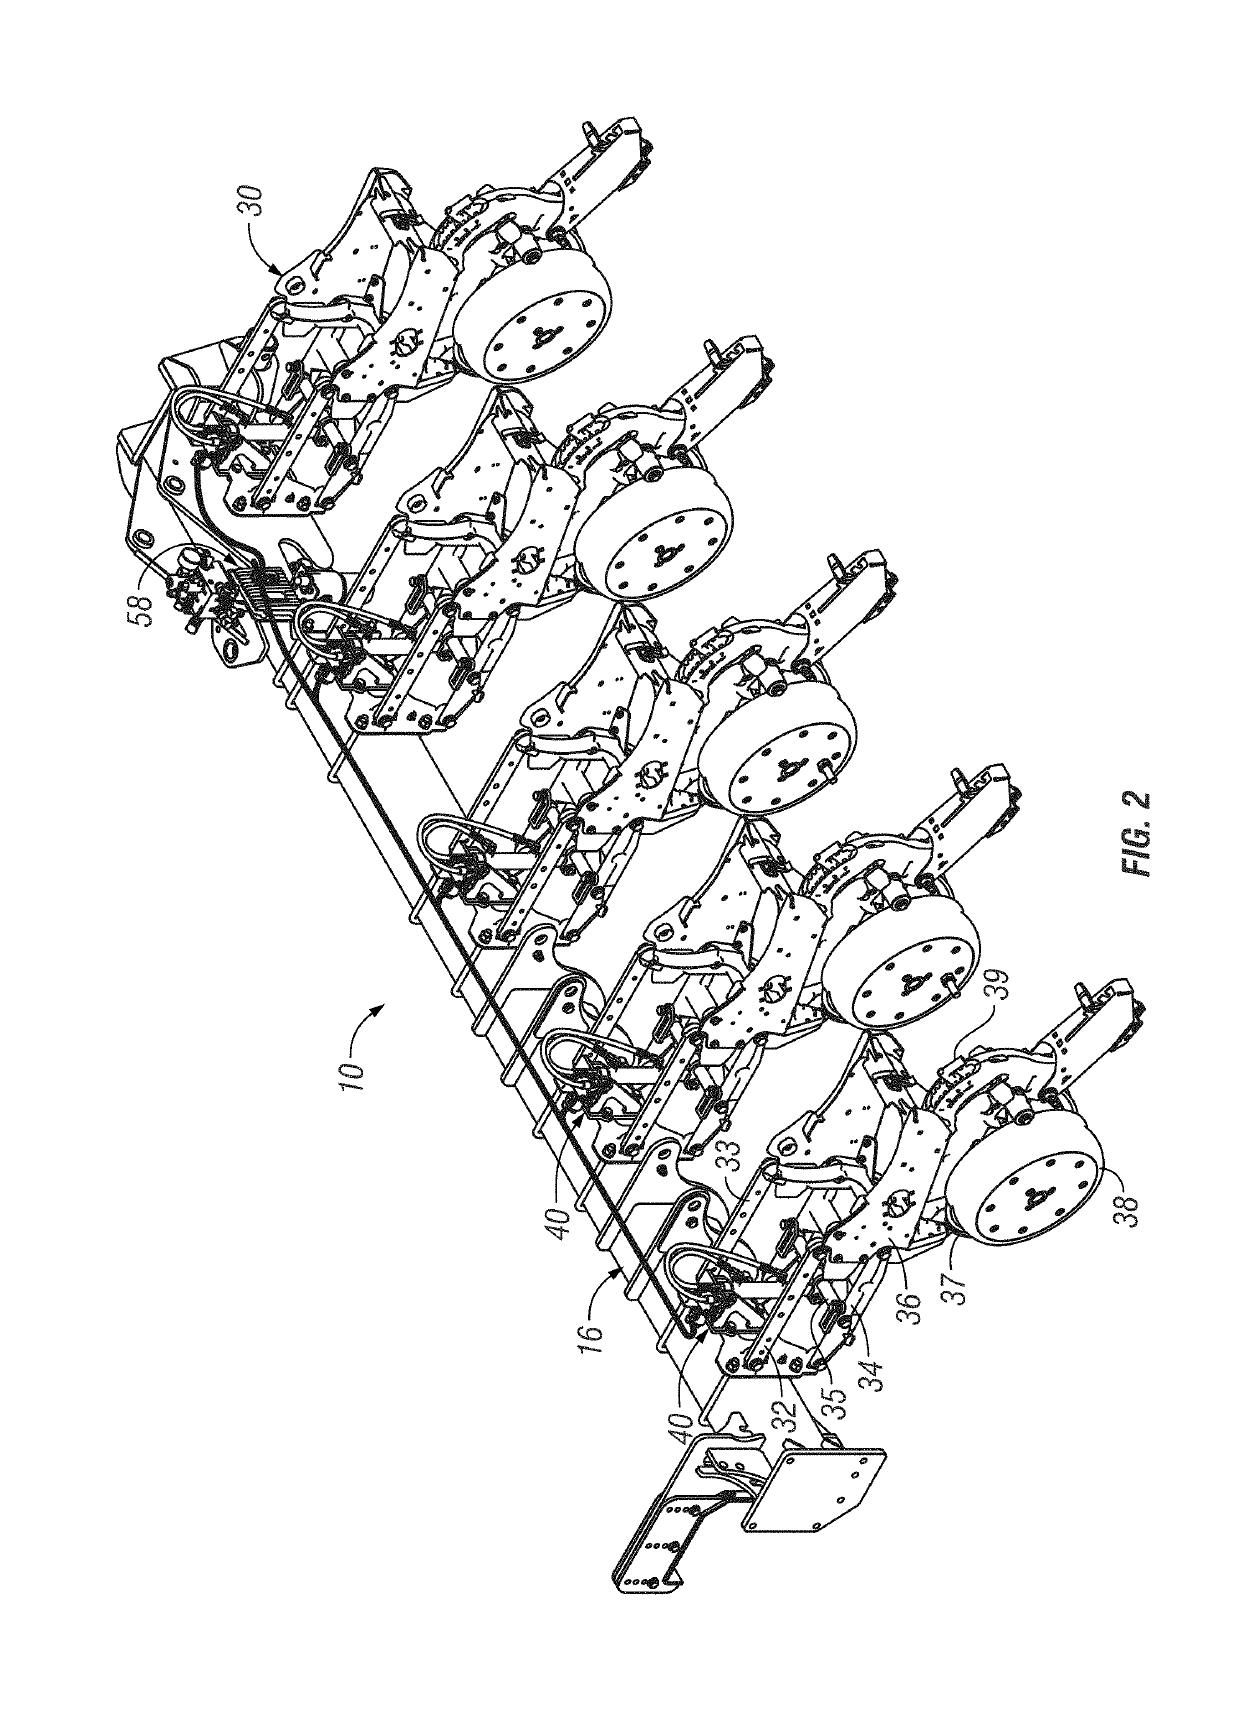 Systems, methods, and apparatus for controlling downforce of an agricultural implement